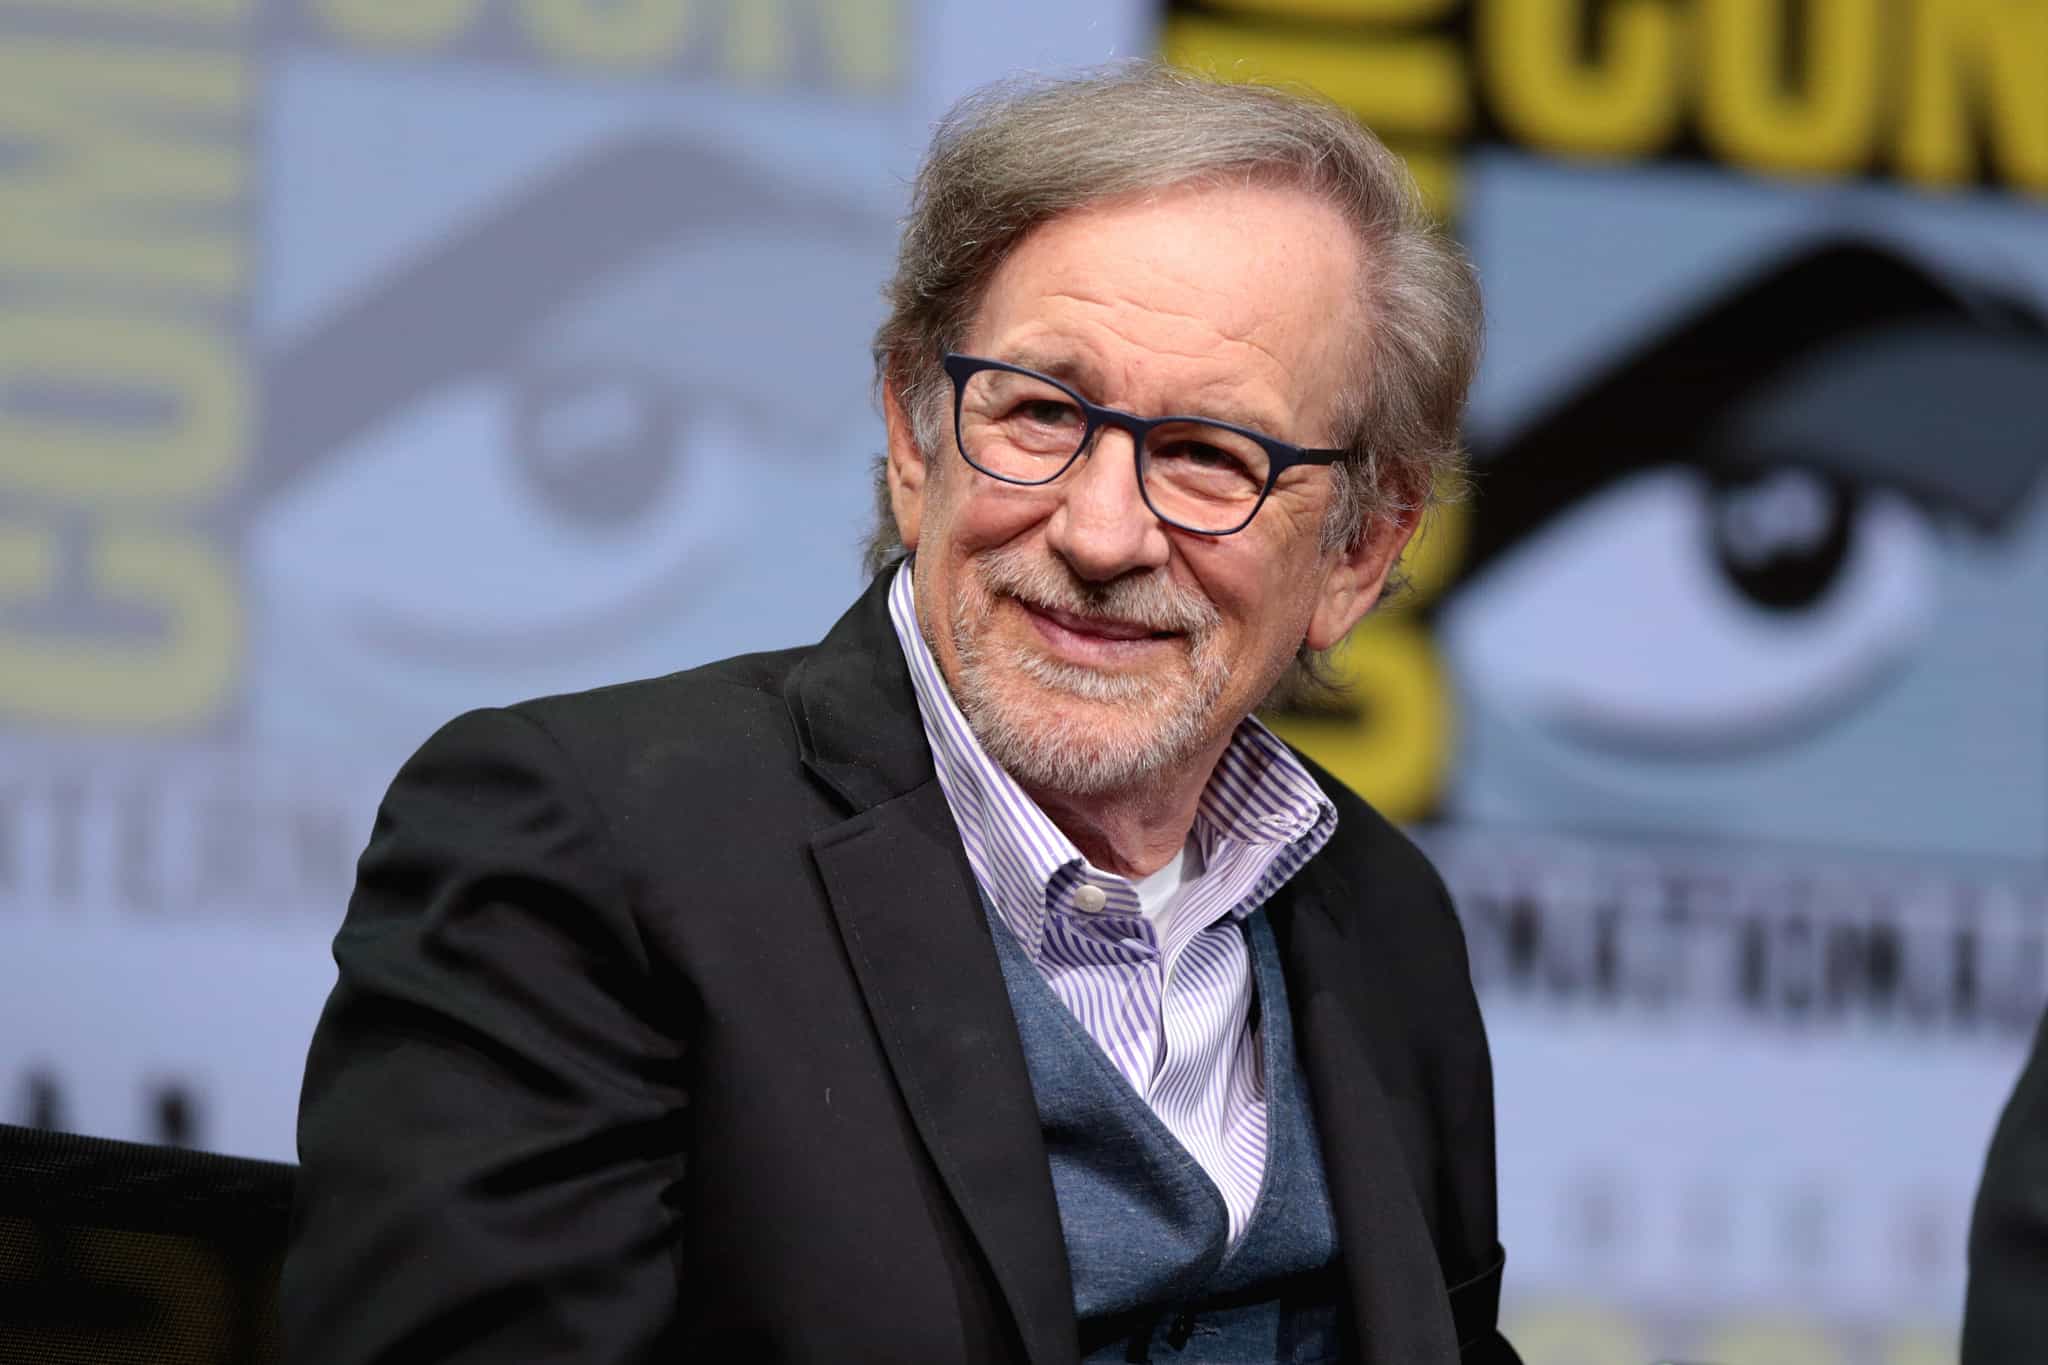 Apple already attracts top talent like Steven Spielberg, show onstage at Comic-Con International in 2017.